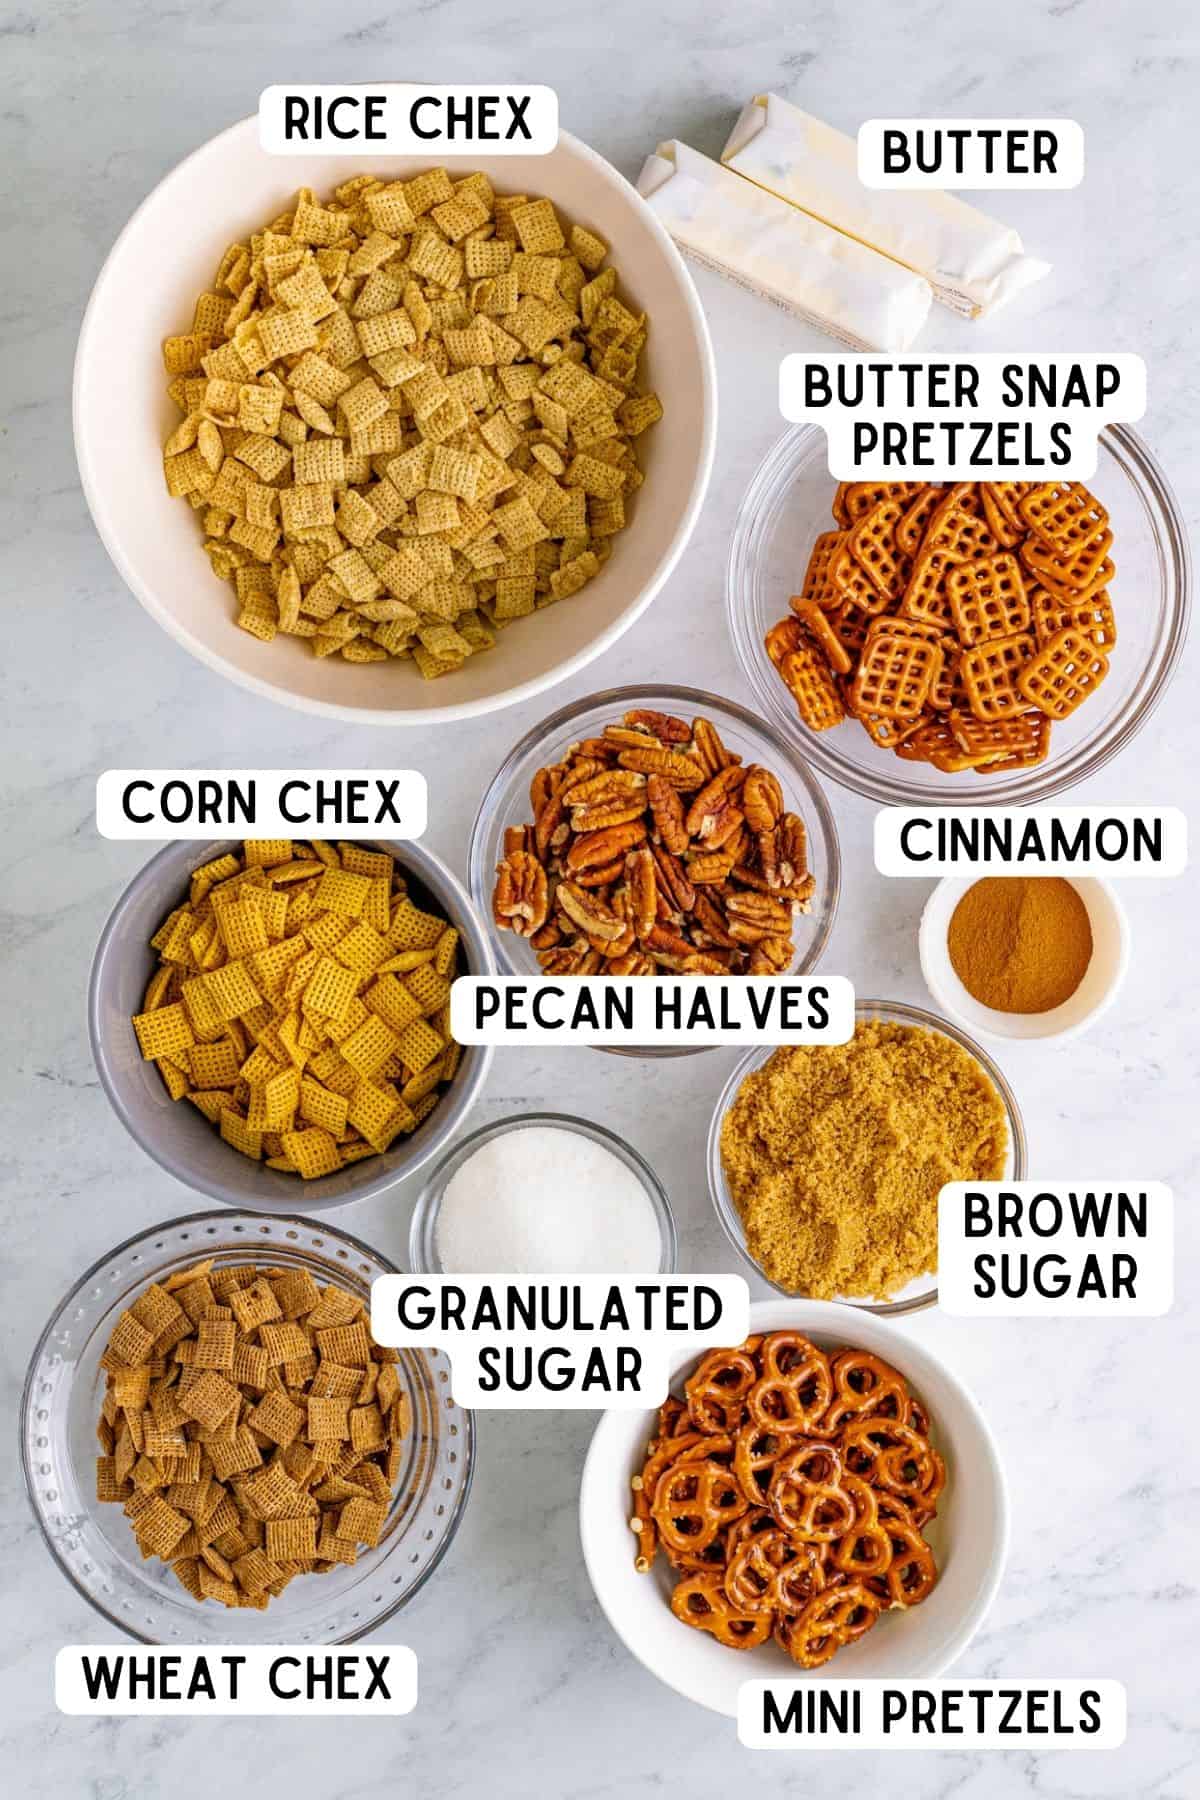 Ingredients for Chex Mix.